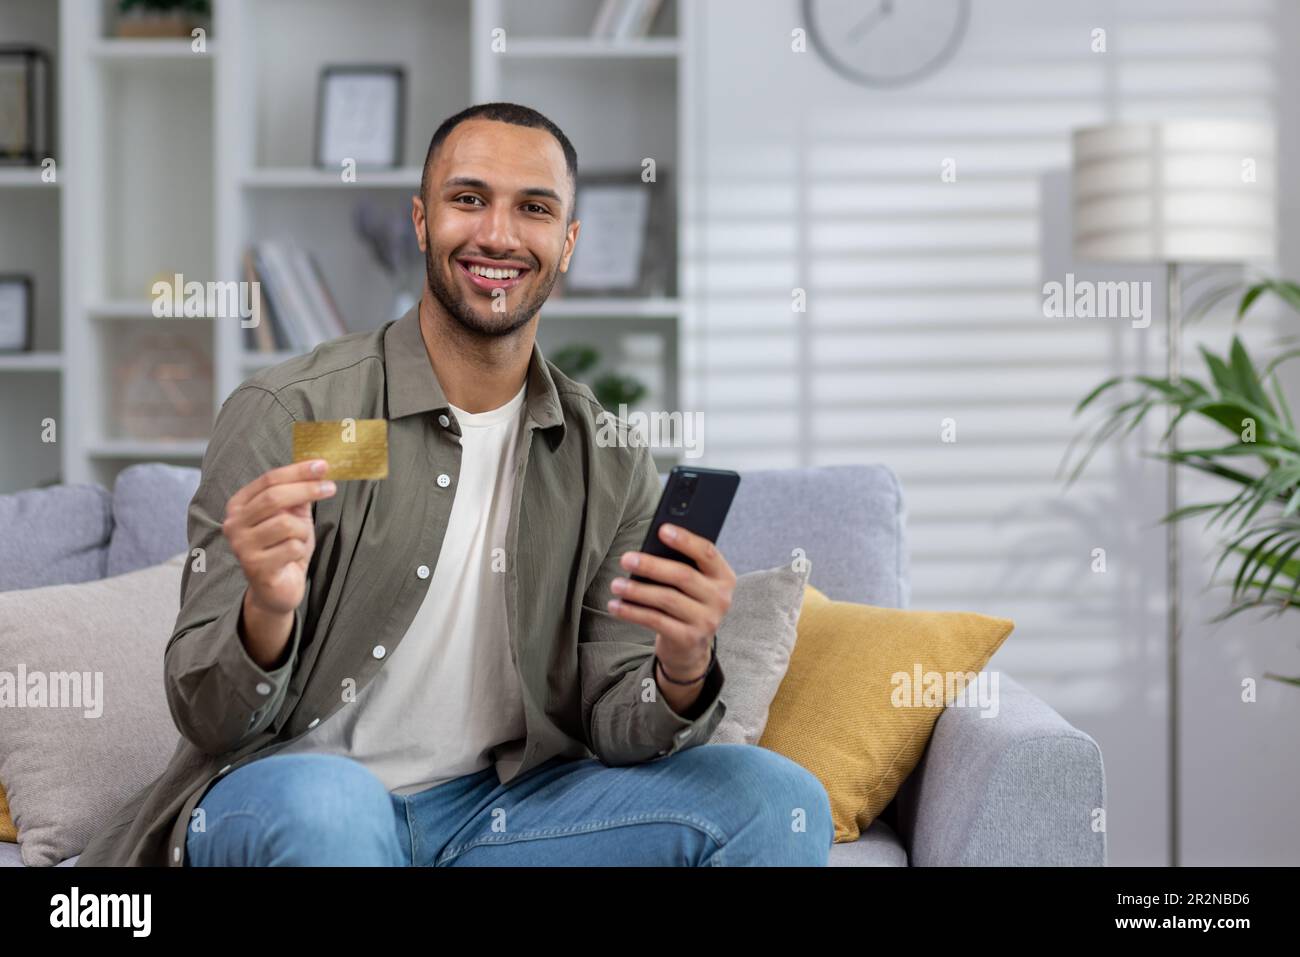 Online shopping. Portrait of a young African American man is sitting on the couch at home, holding a credit card and a phone. Smiling at the camera. Stock Photo